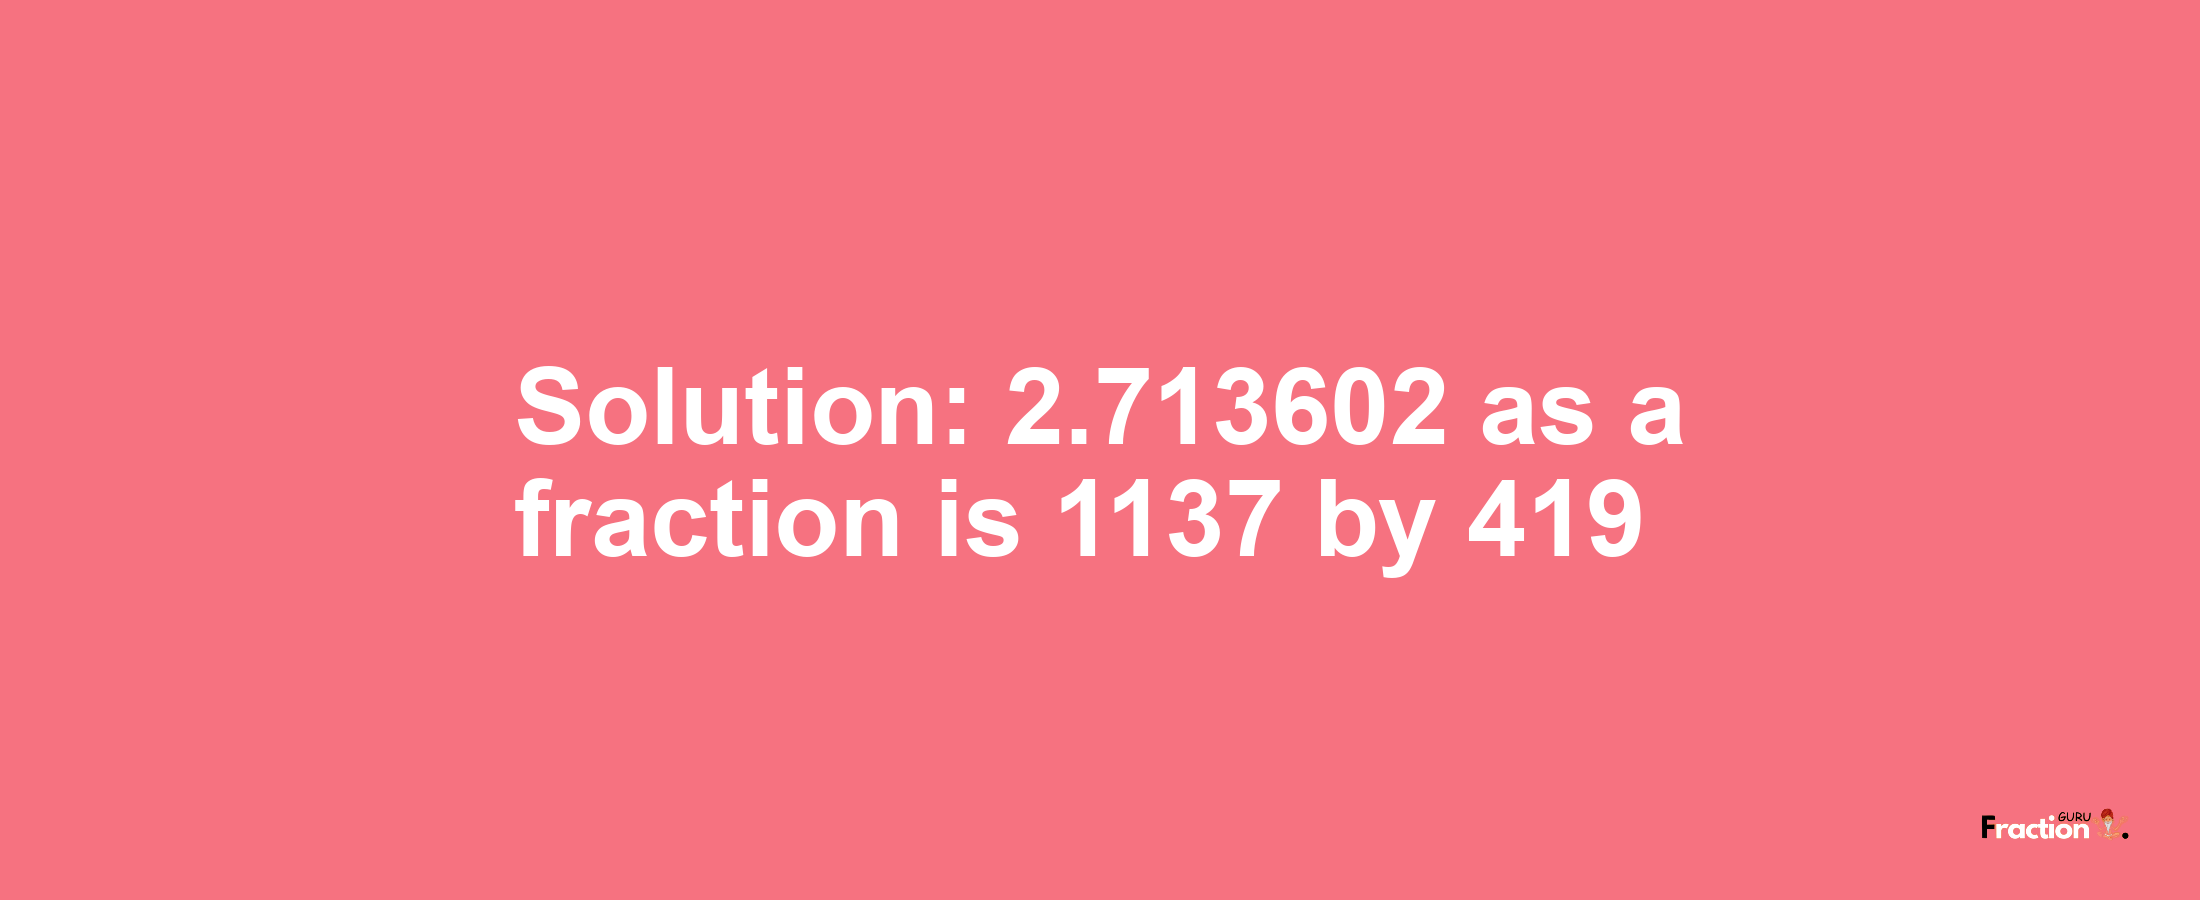 Solution:2.713602 as a fraction is 1137/419